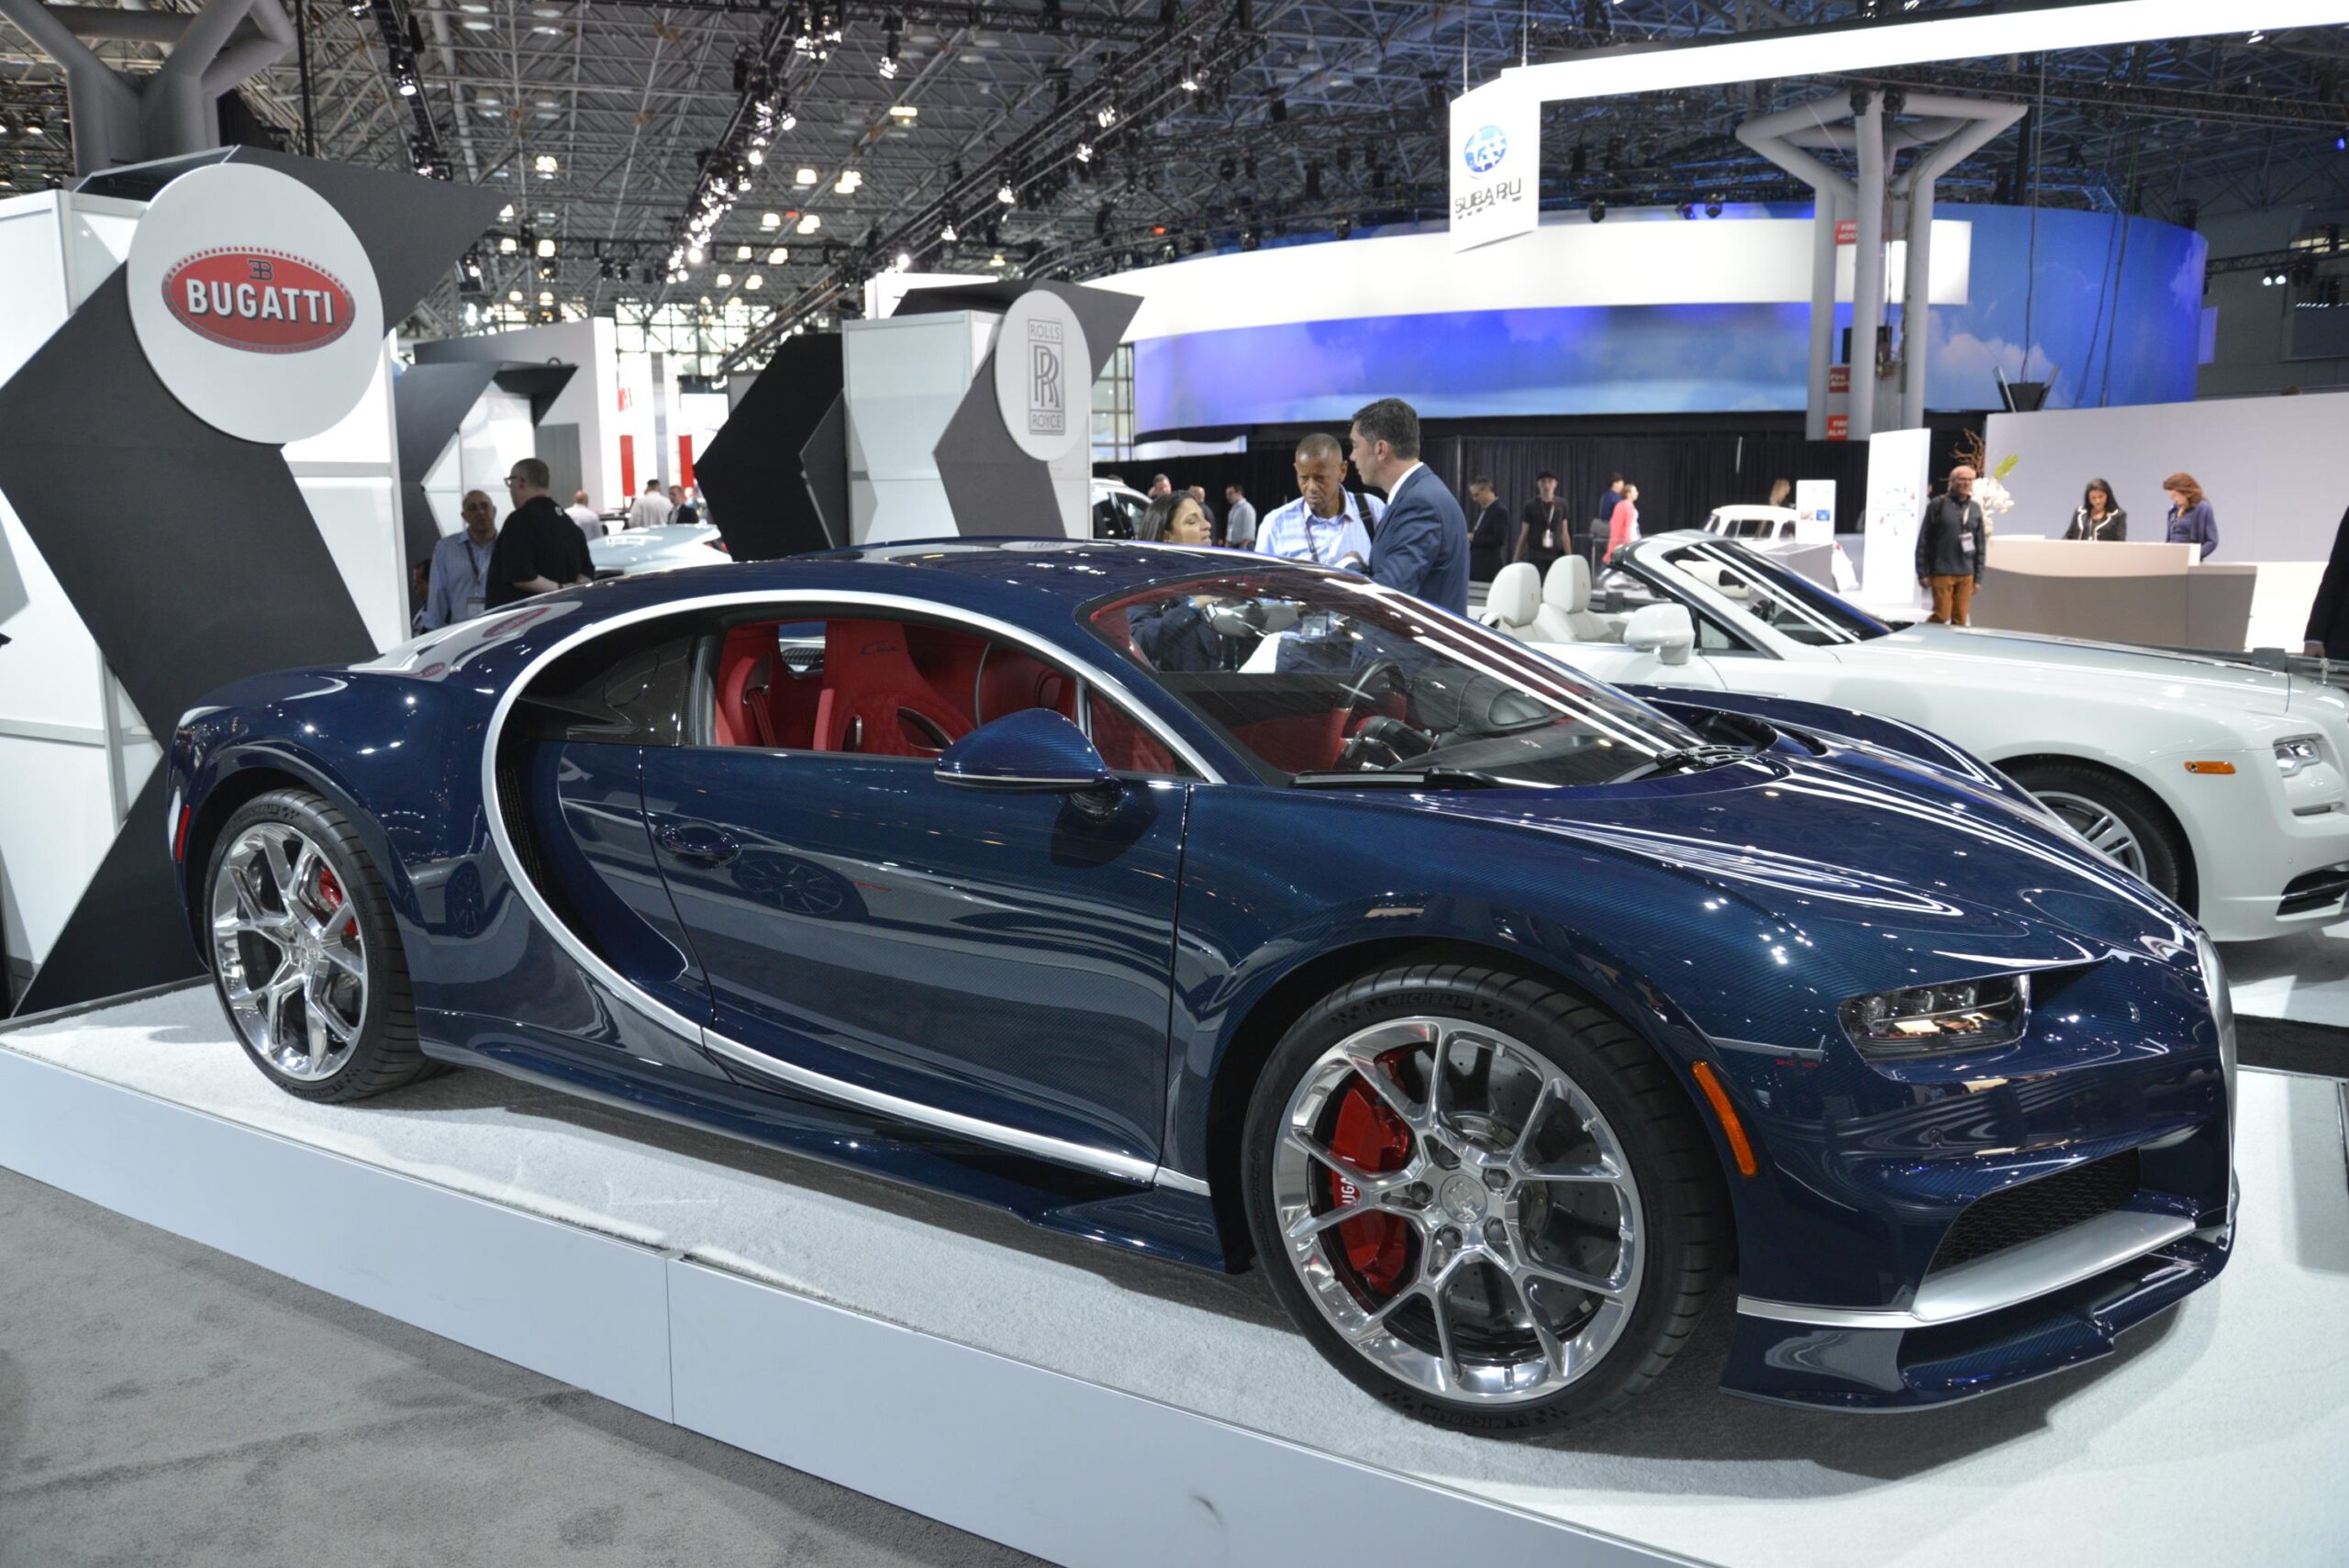 Highlights from the 2017 New York International Auto Show